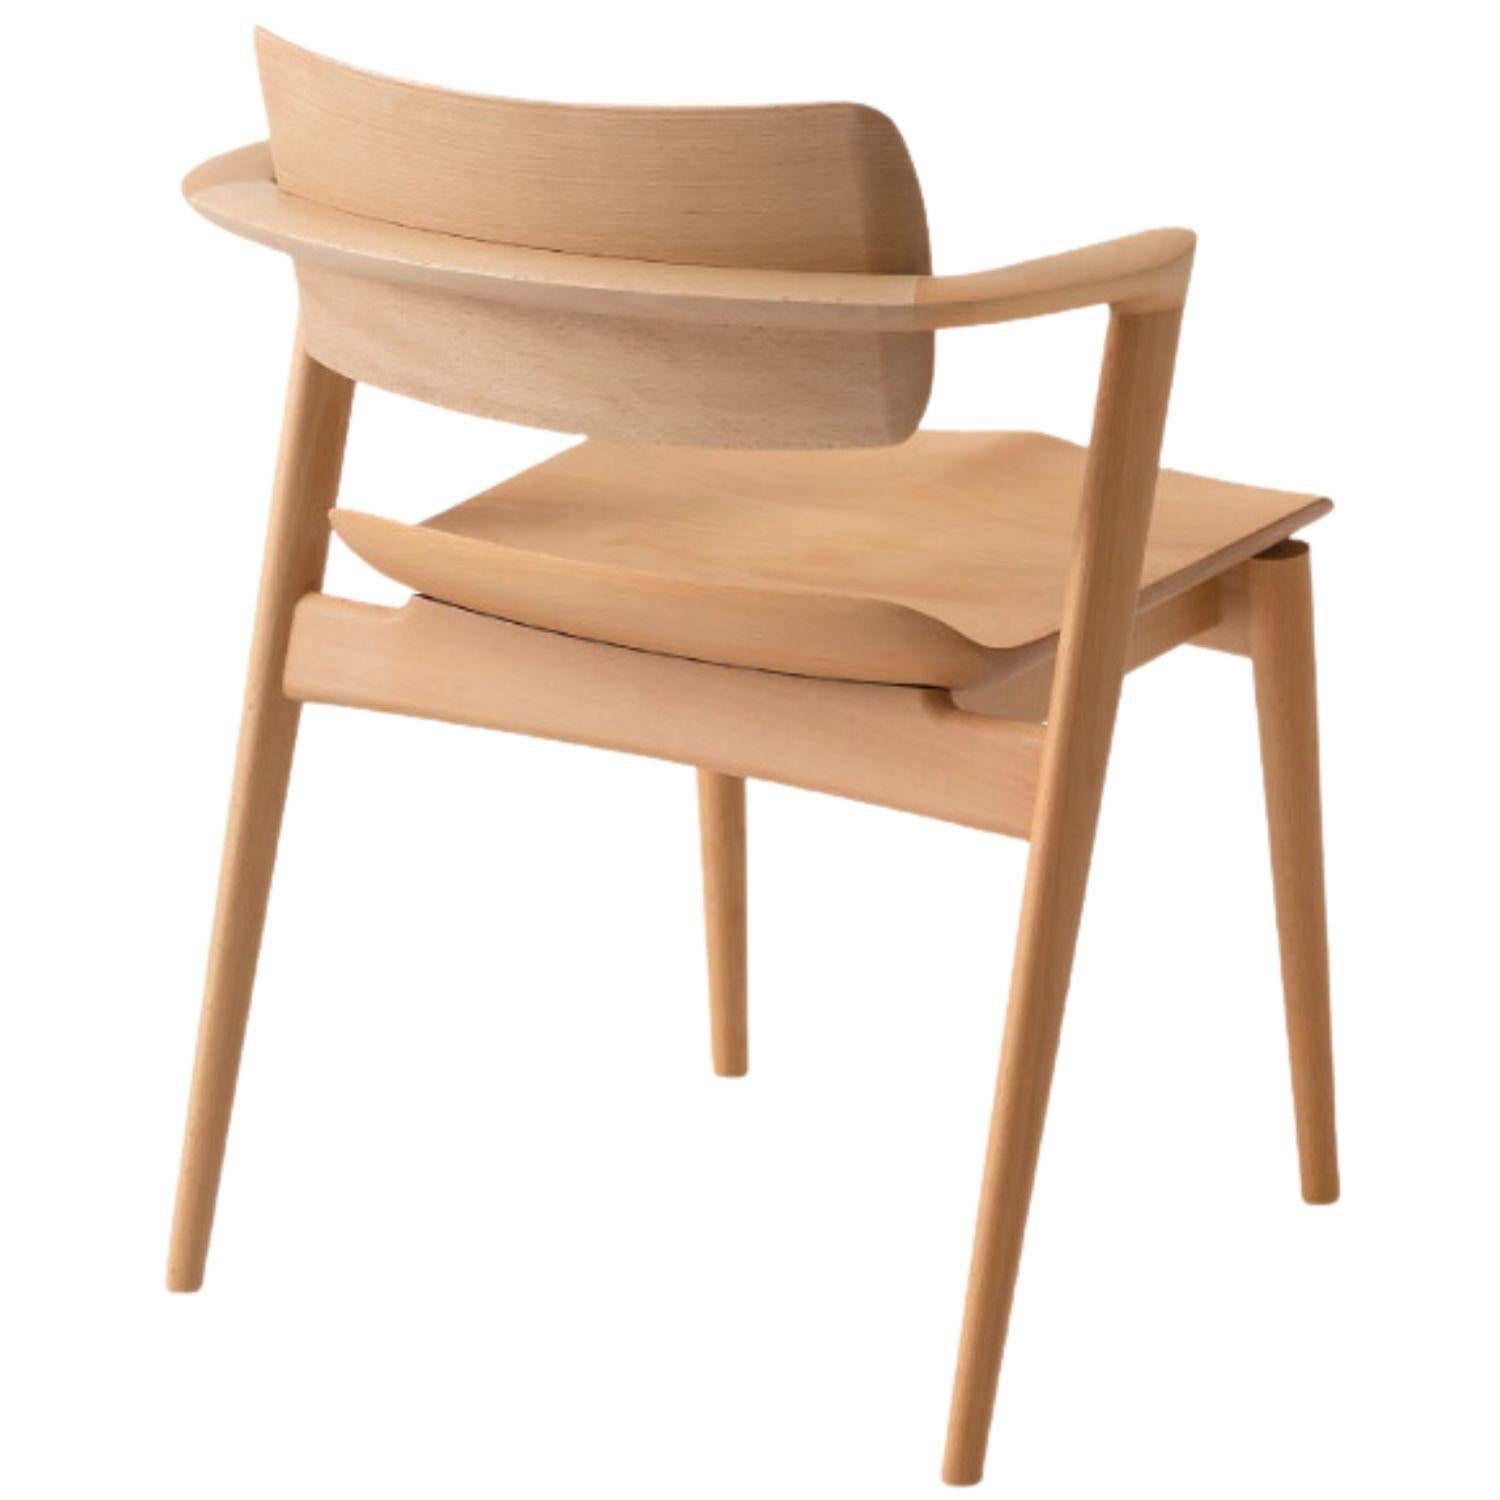 Motomi Kawakami 'Seoto-Ex KX251' semi-arm dining chair in beech for Hida.

For centuries, famed Hida artisans in Gifu prefecture have played a role in Japan's woodworking culture, crafting iconic bentwood furniture from sustainable local forests.